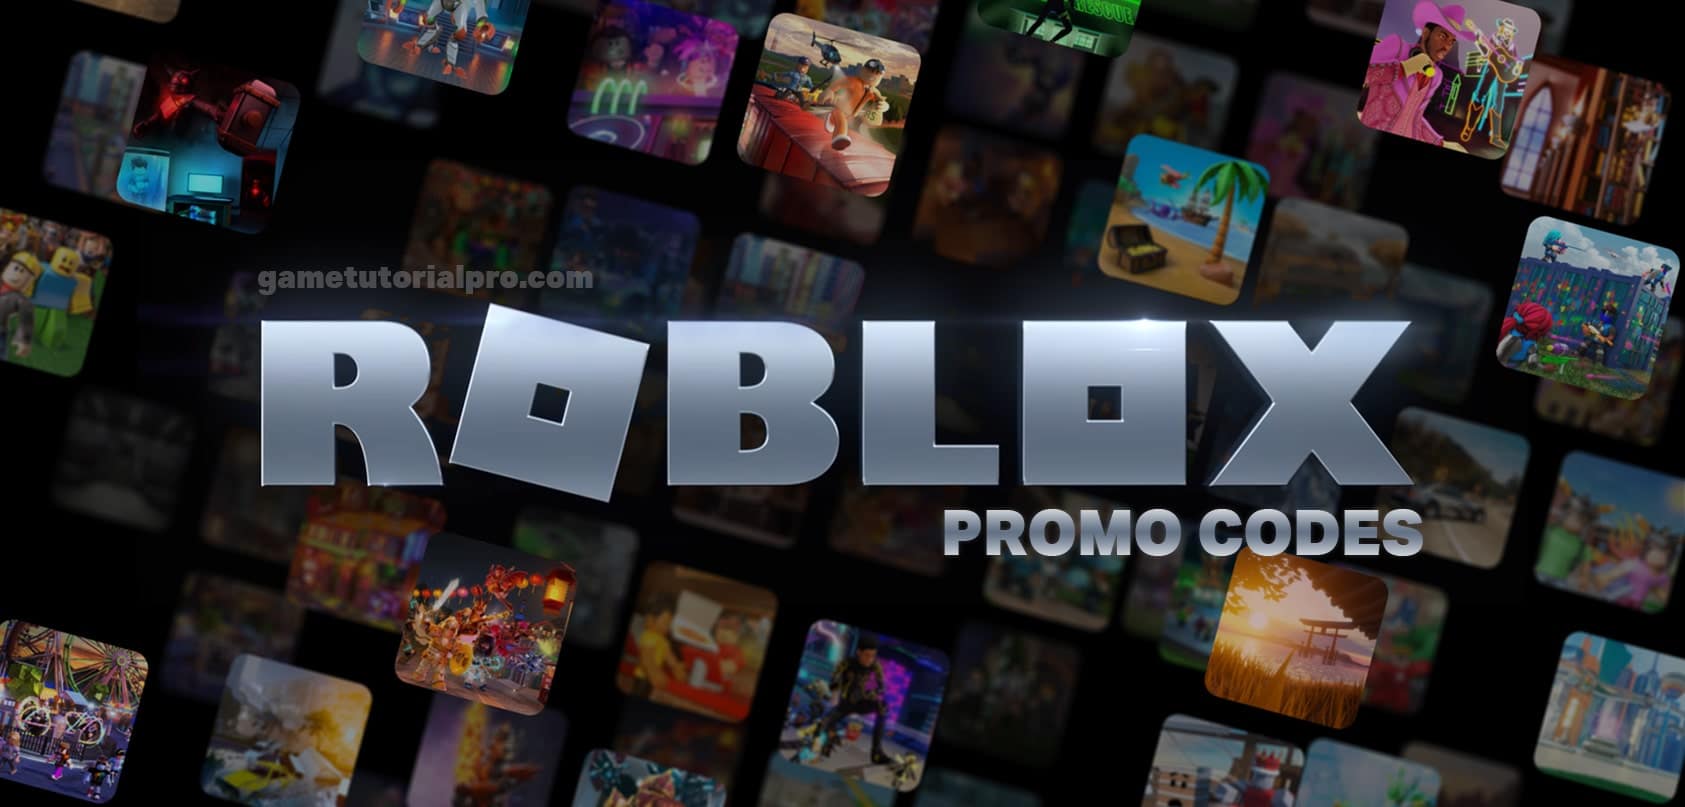 Newest Roblox Promo Codes List (Updated) - Roblox Items For Free